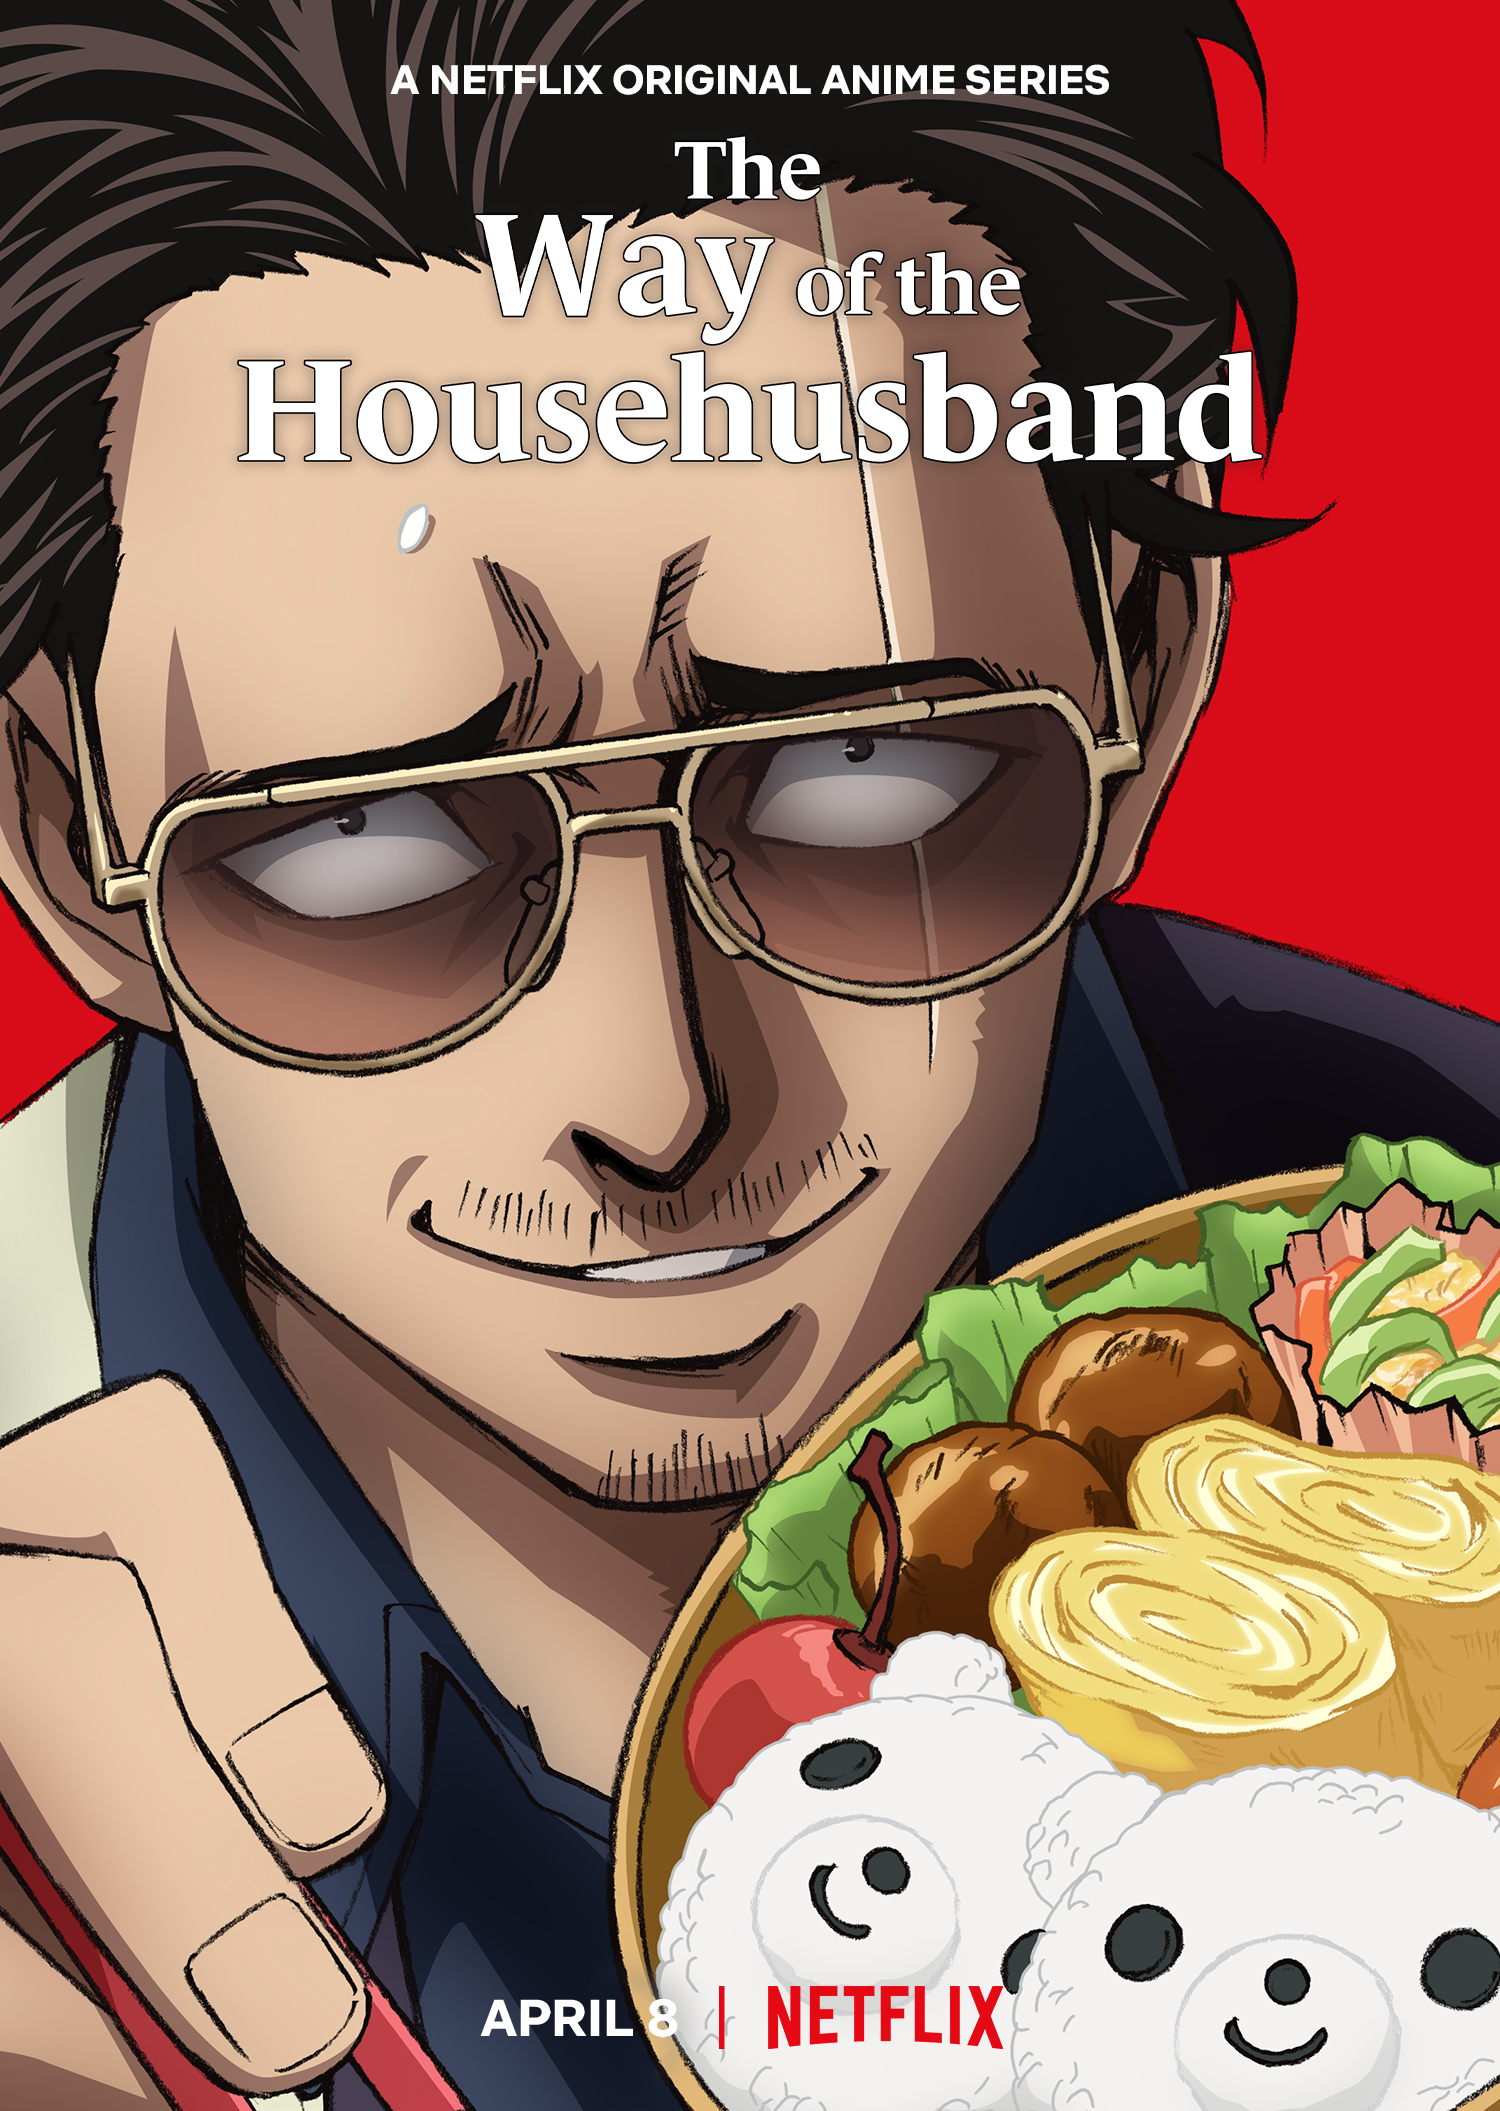 The Way of the Househusband Anime